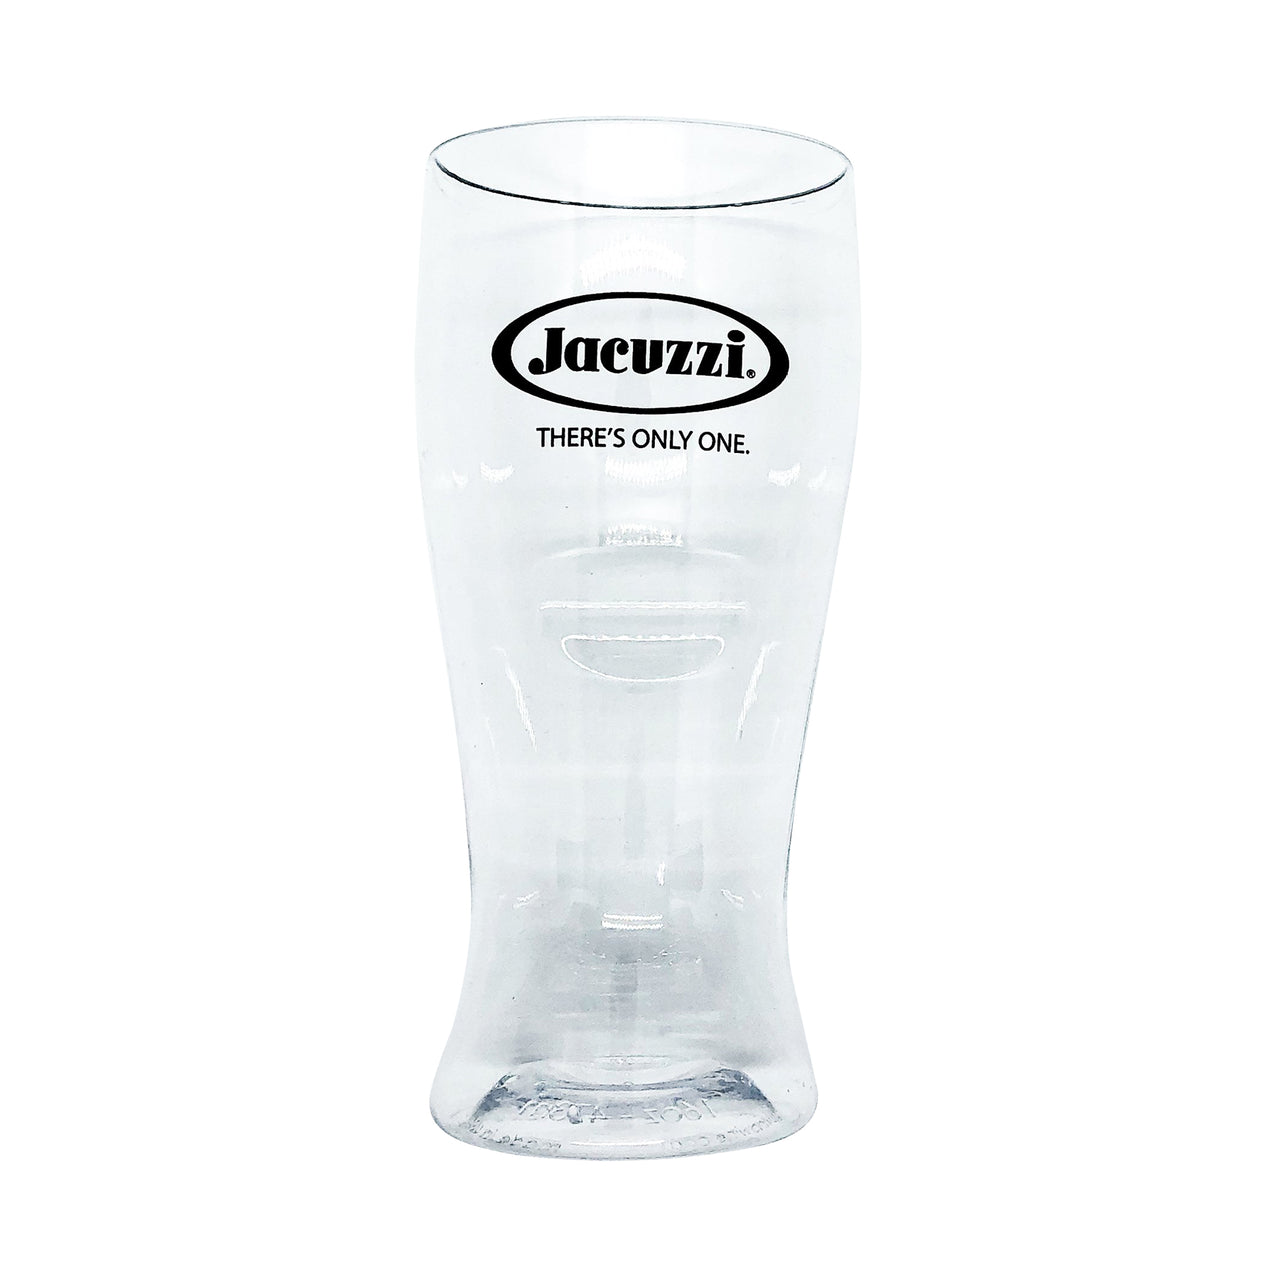 Jacuzzi Beer Glass - Hot Tub Store